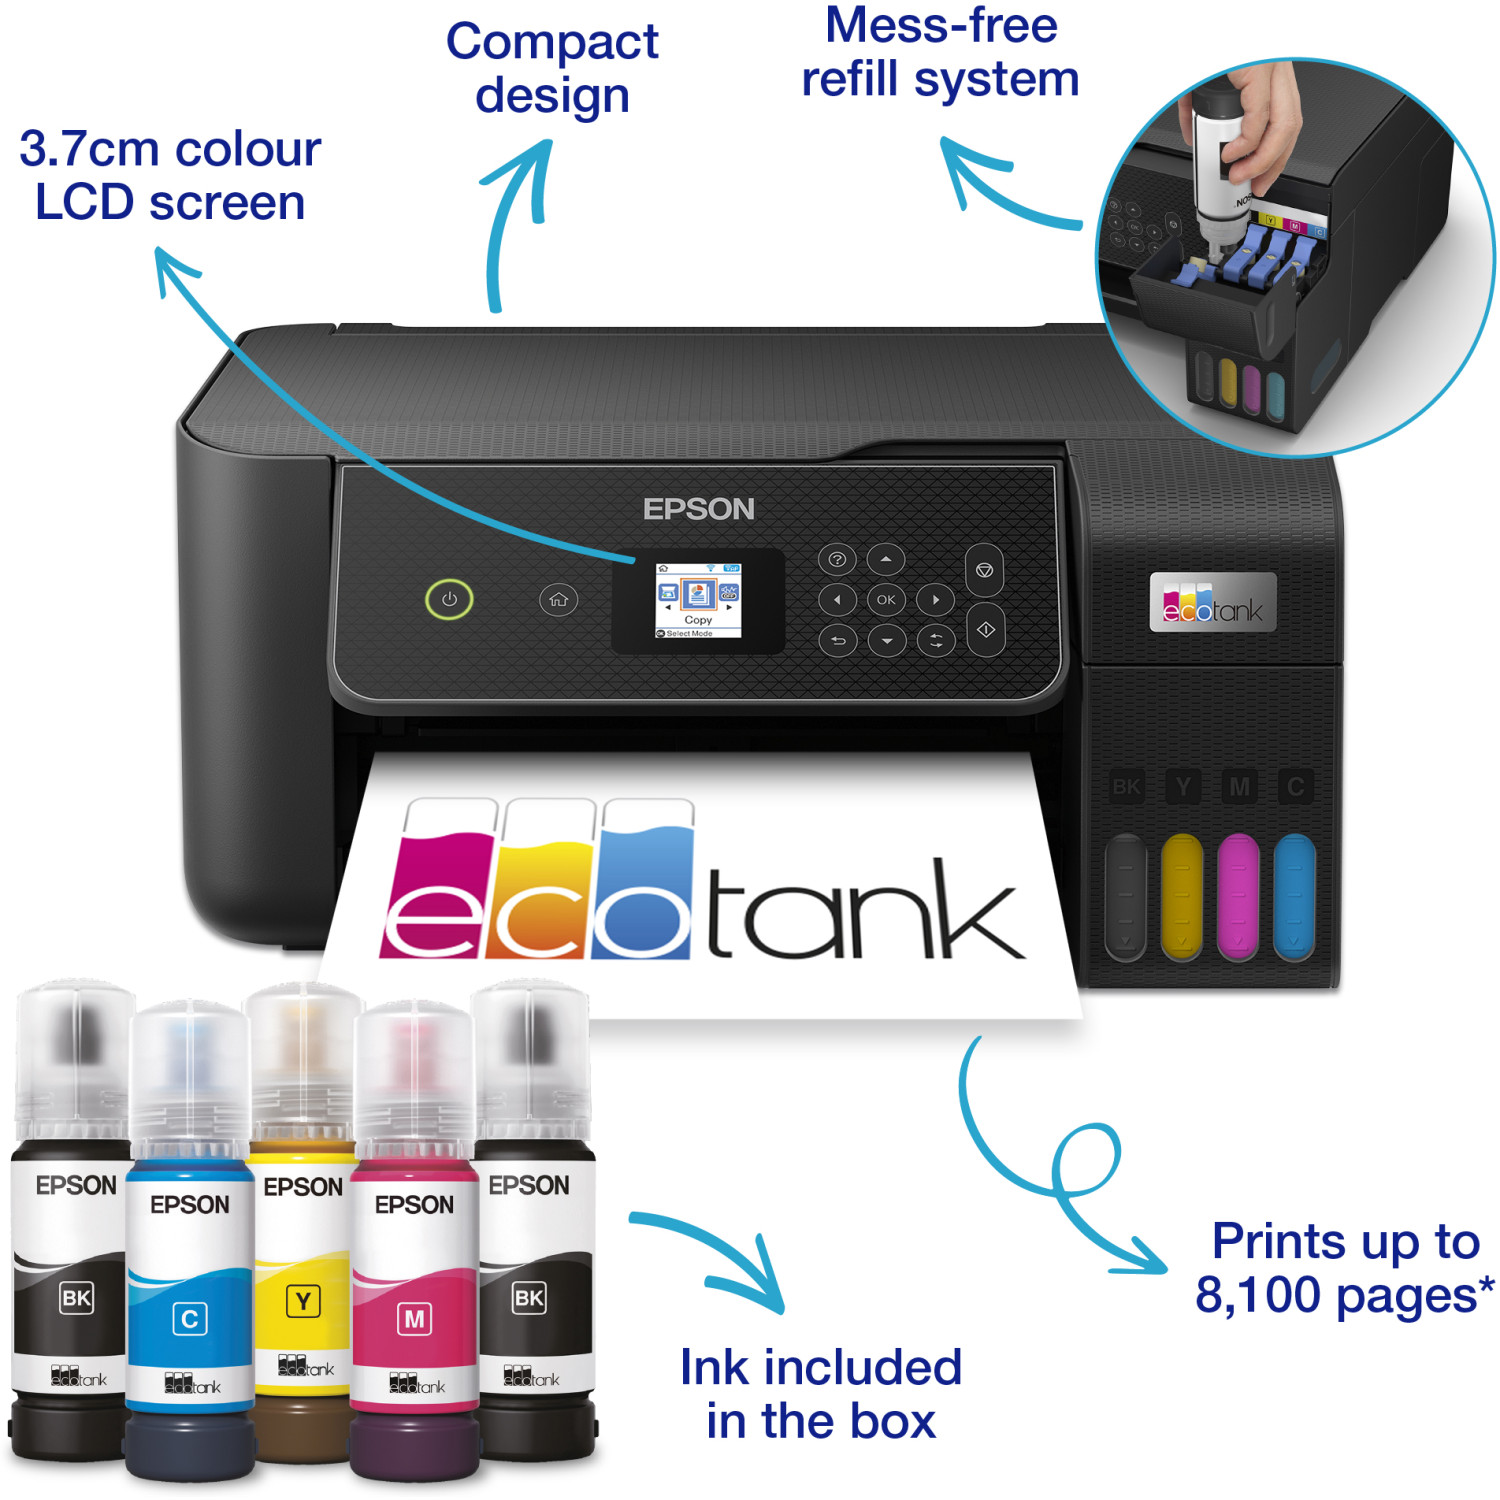 EcoTank L3280 A4 Multifunction Wi-Fi Ink Tank Printer, With Up To 